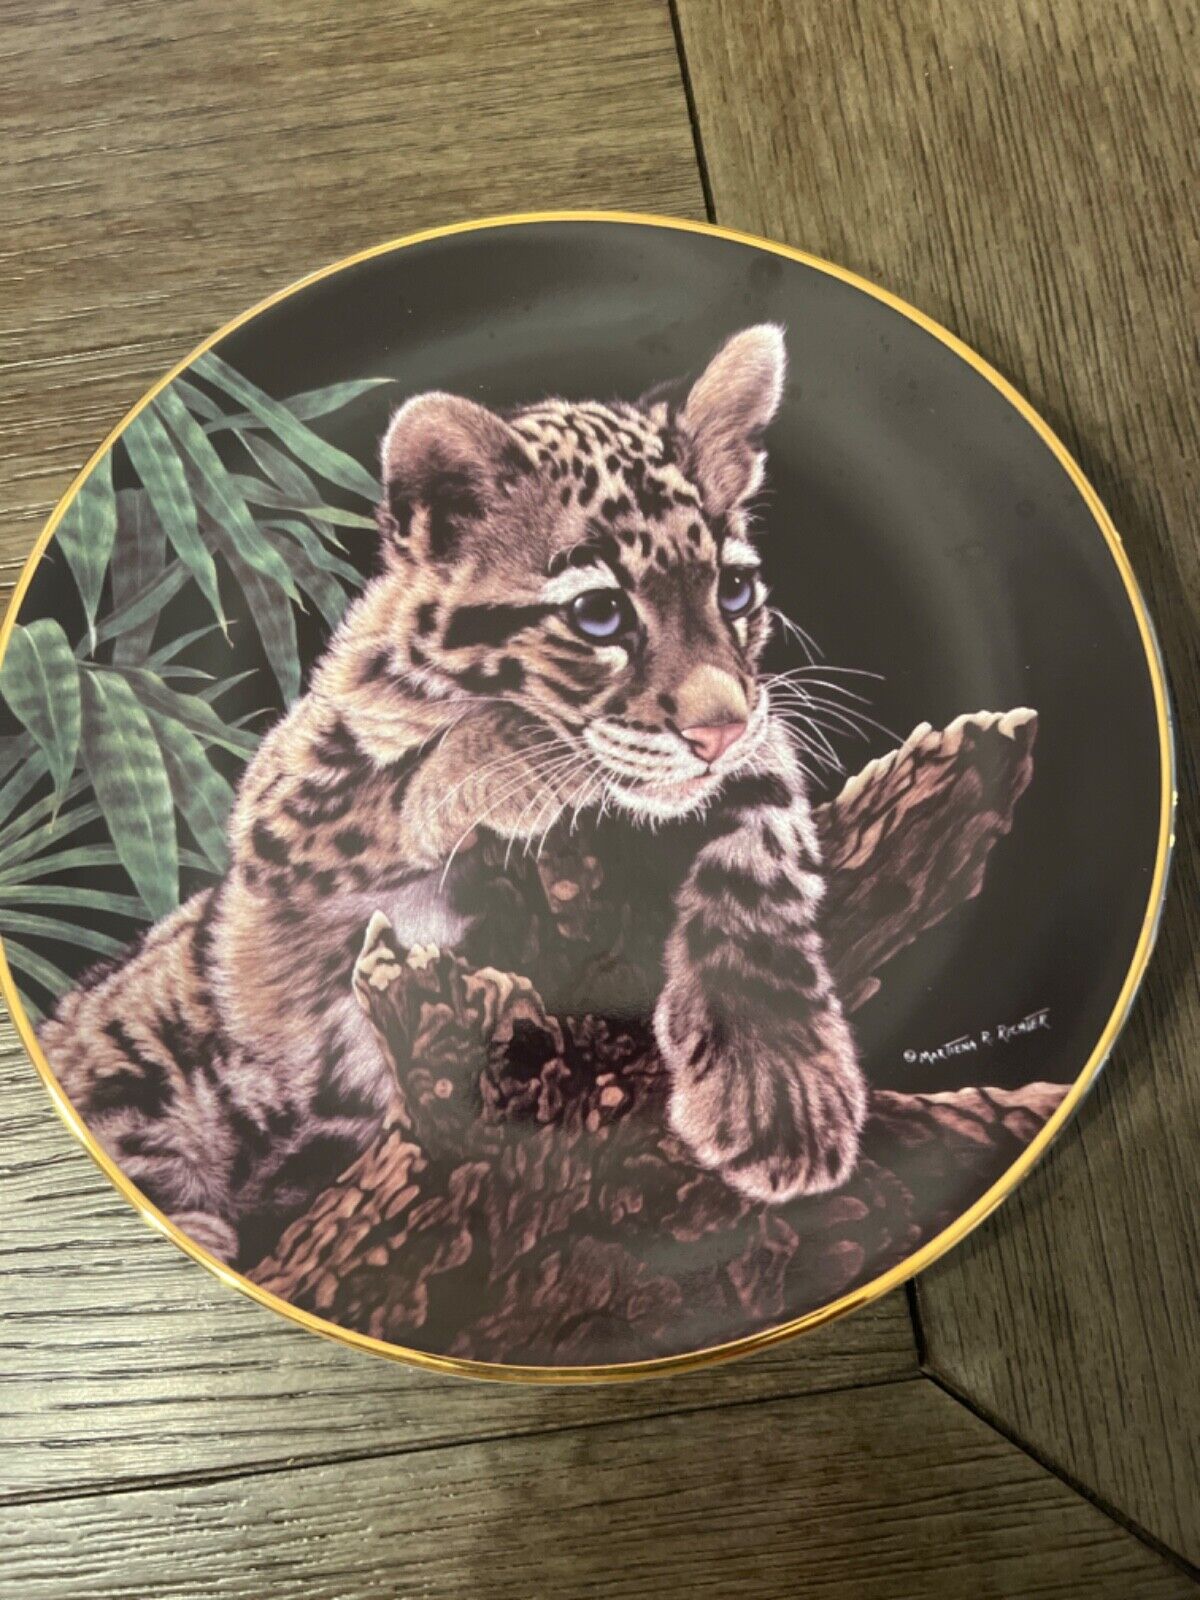 The Hamilton Collection Asian Clouded Leopard cub playe 1995